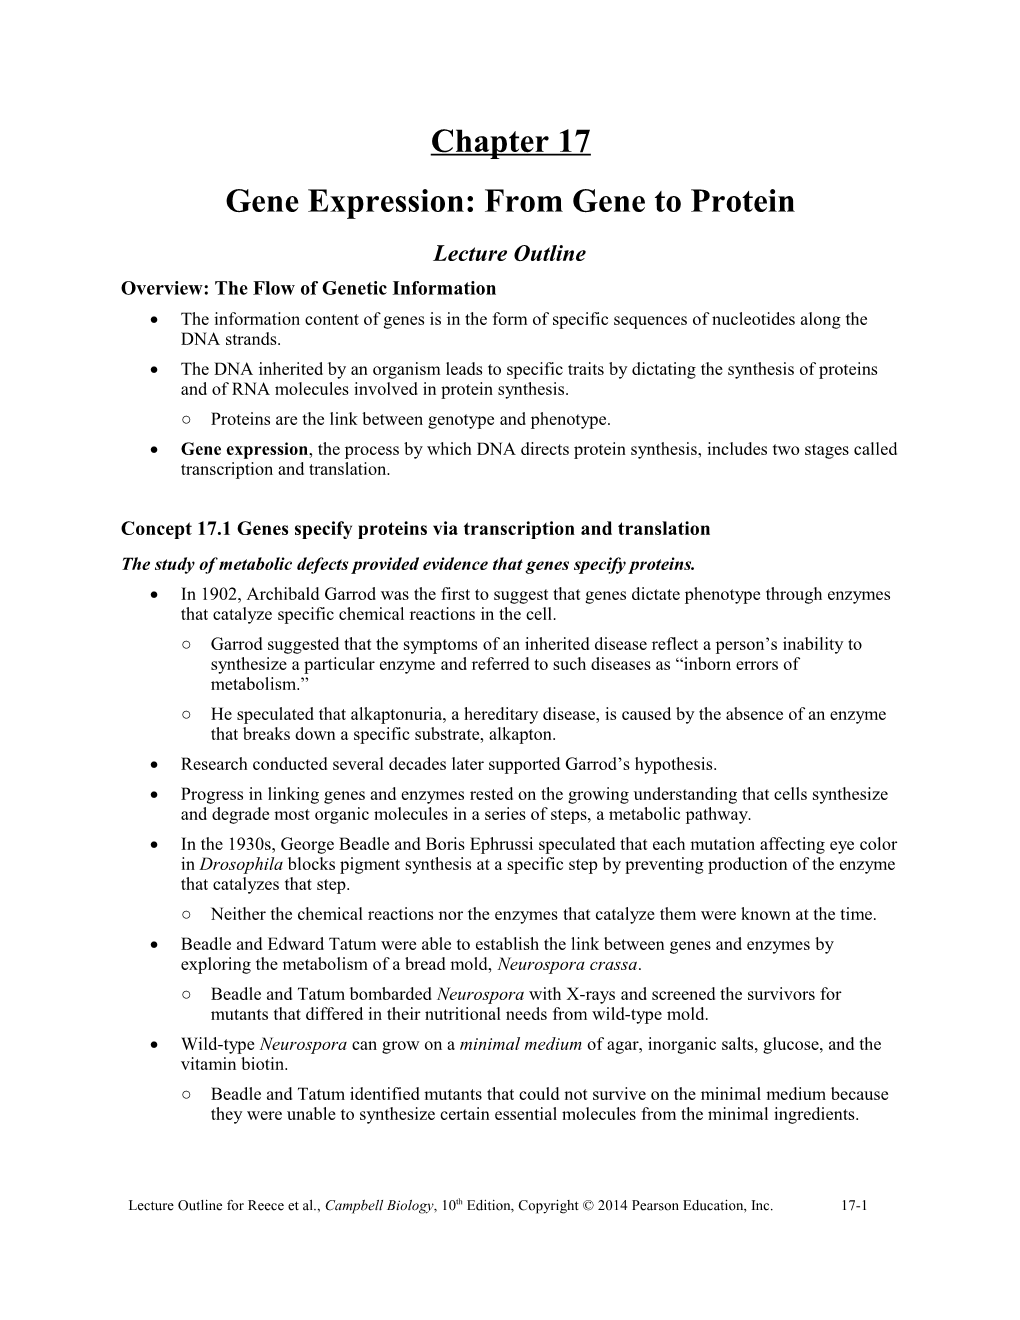 Chapter 17 from Gene to Protein